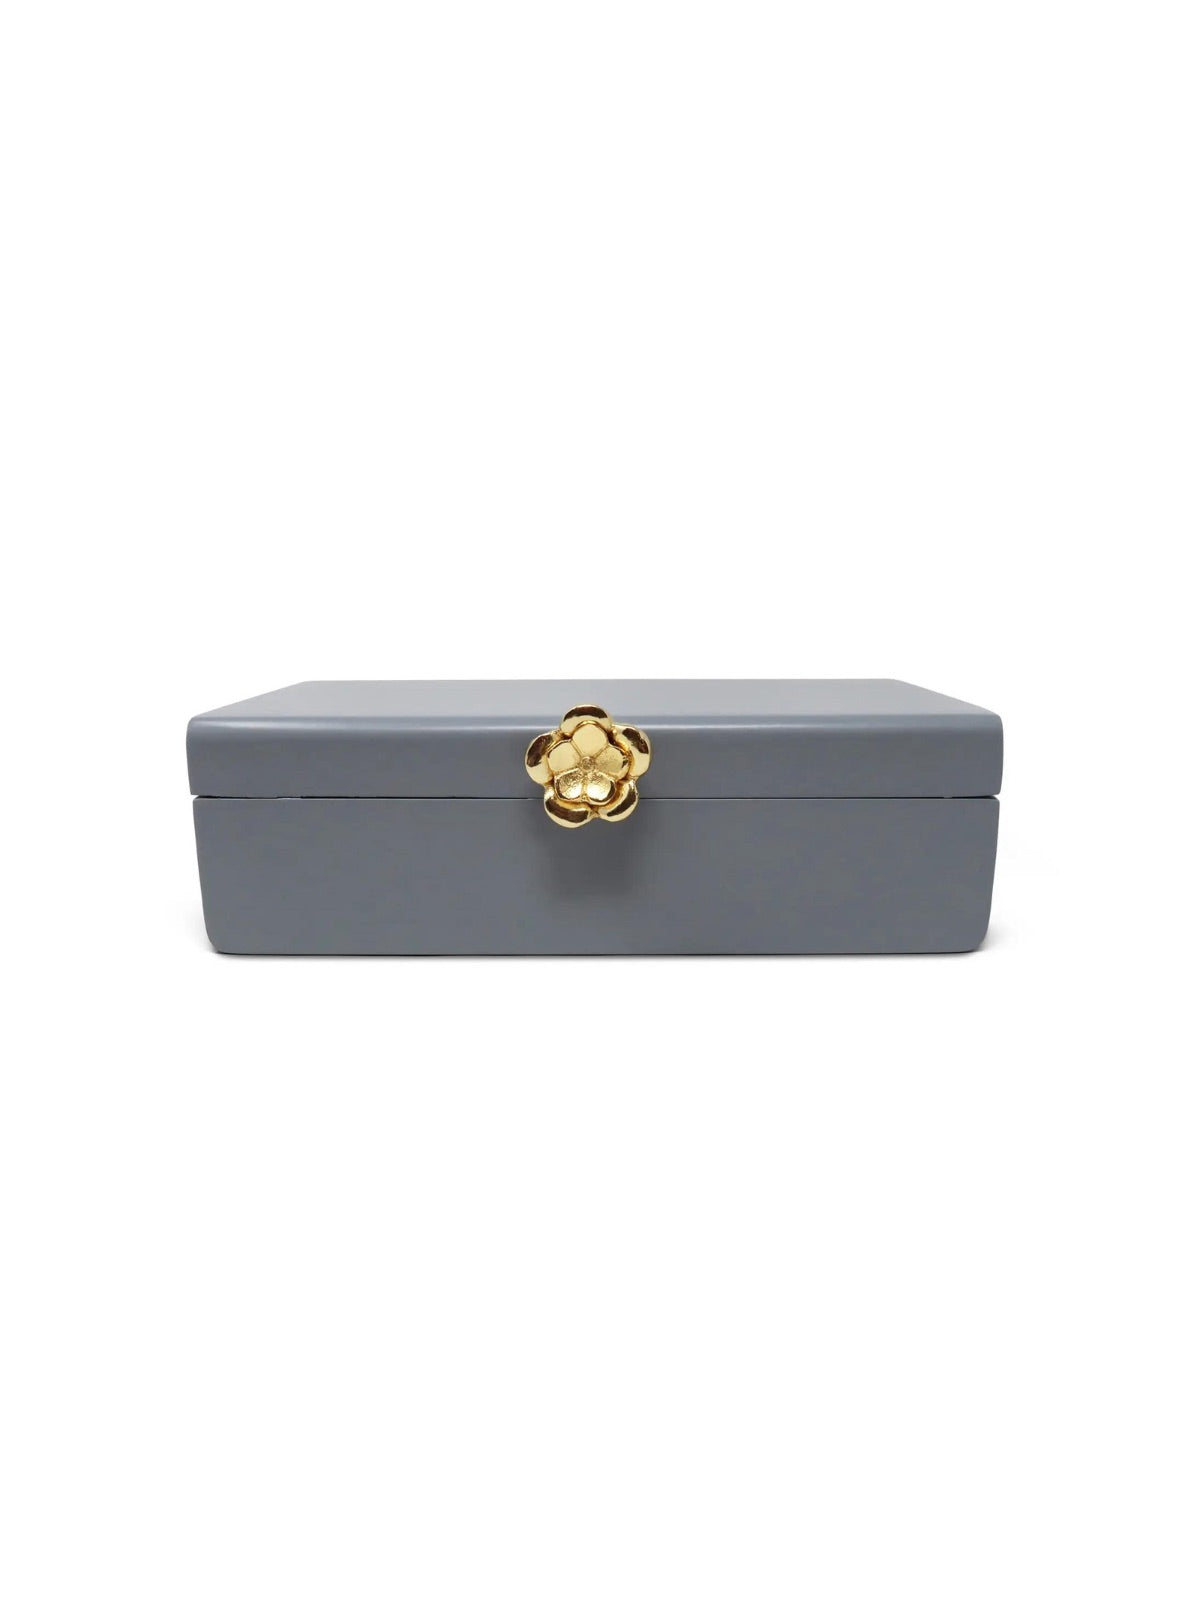 12 inch Grey Wood Decorative Box with Gold Flower Opener.